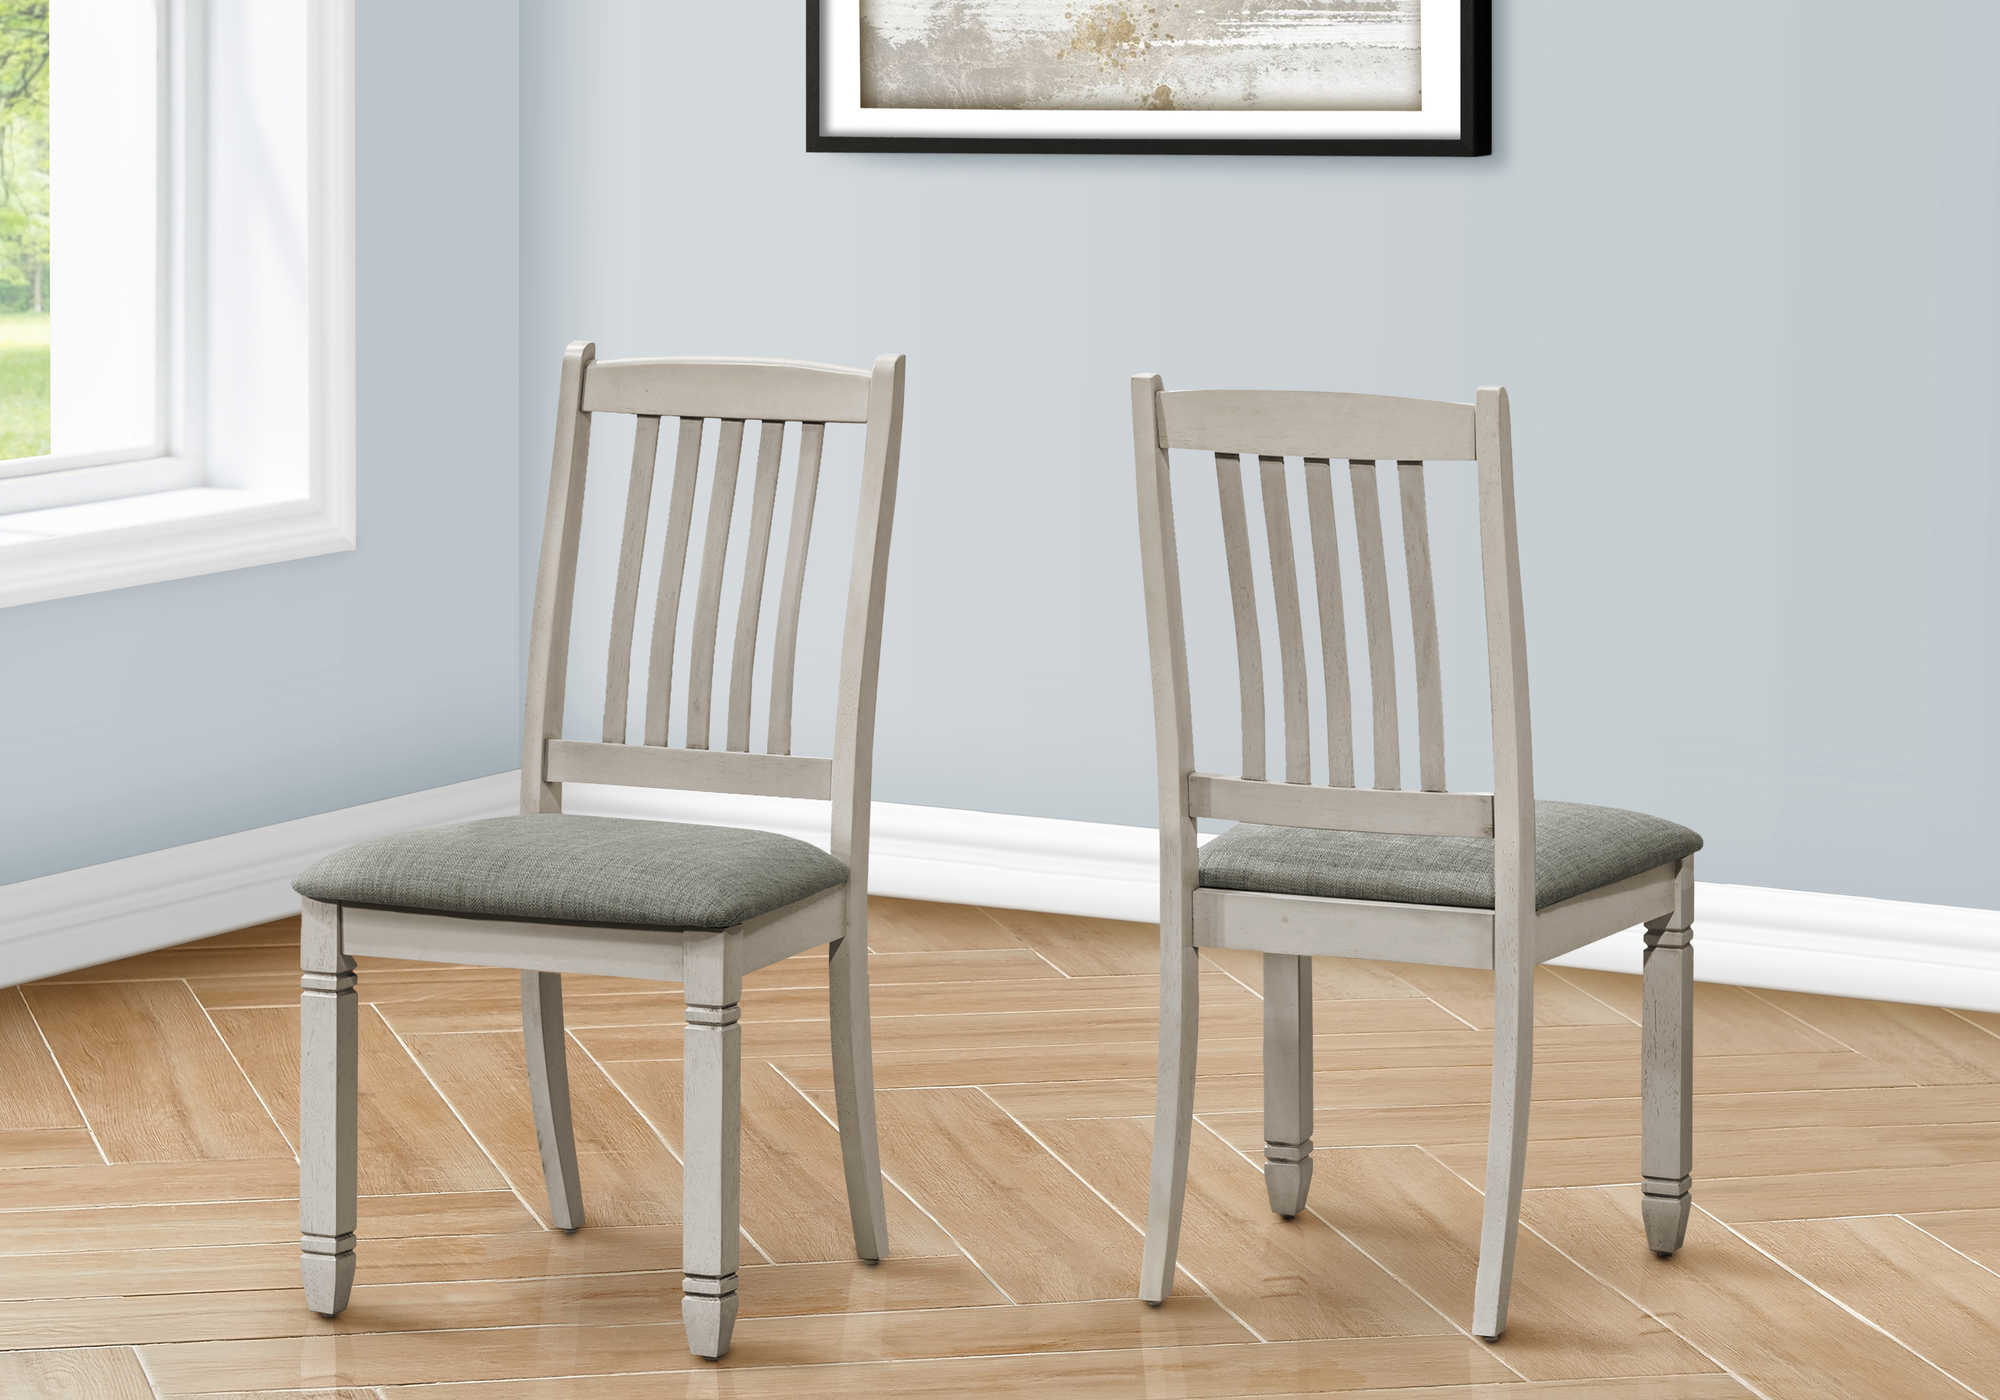 DINING CHAIR - 2PCS / 38"H UPHOLSTERED GREY FABRIC